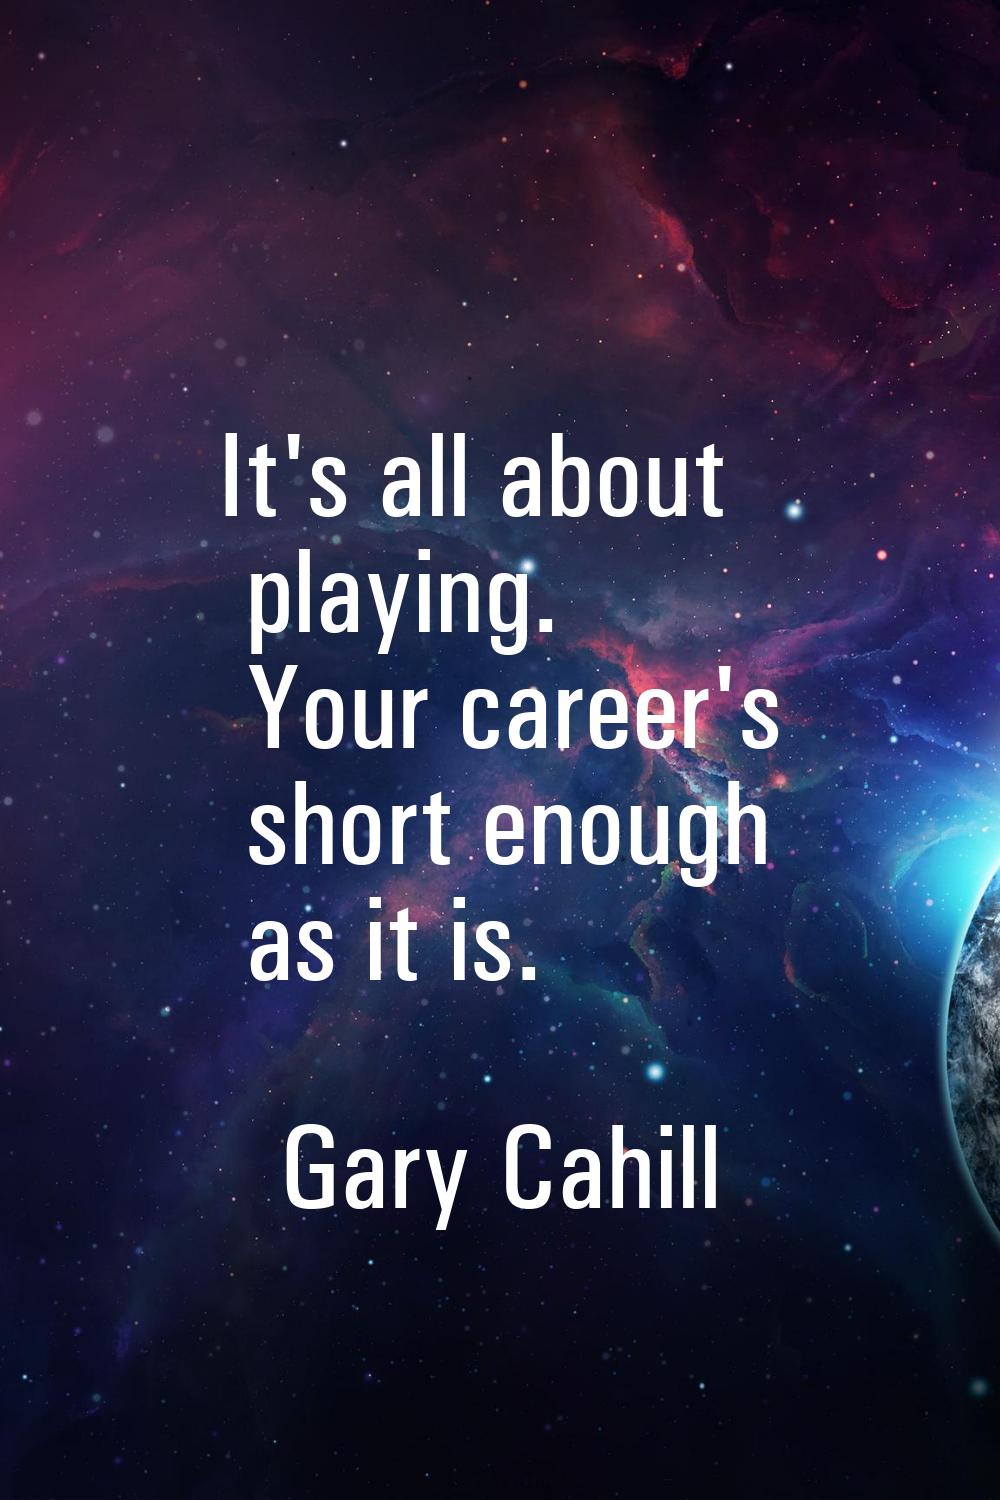 It's all about playing. Your career's short enough as it is.